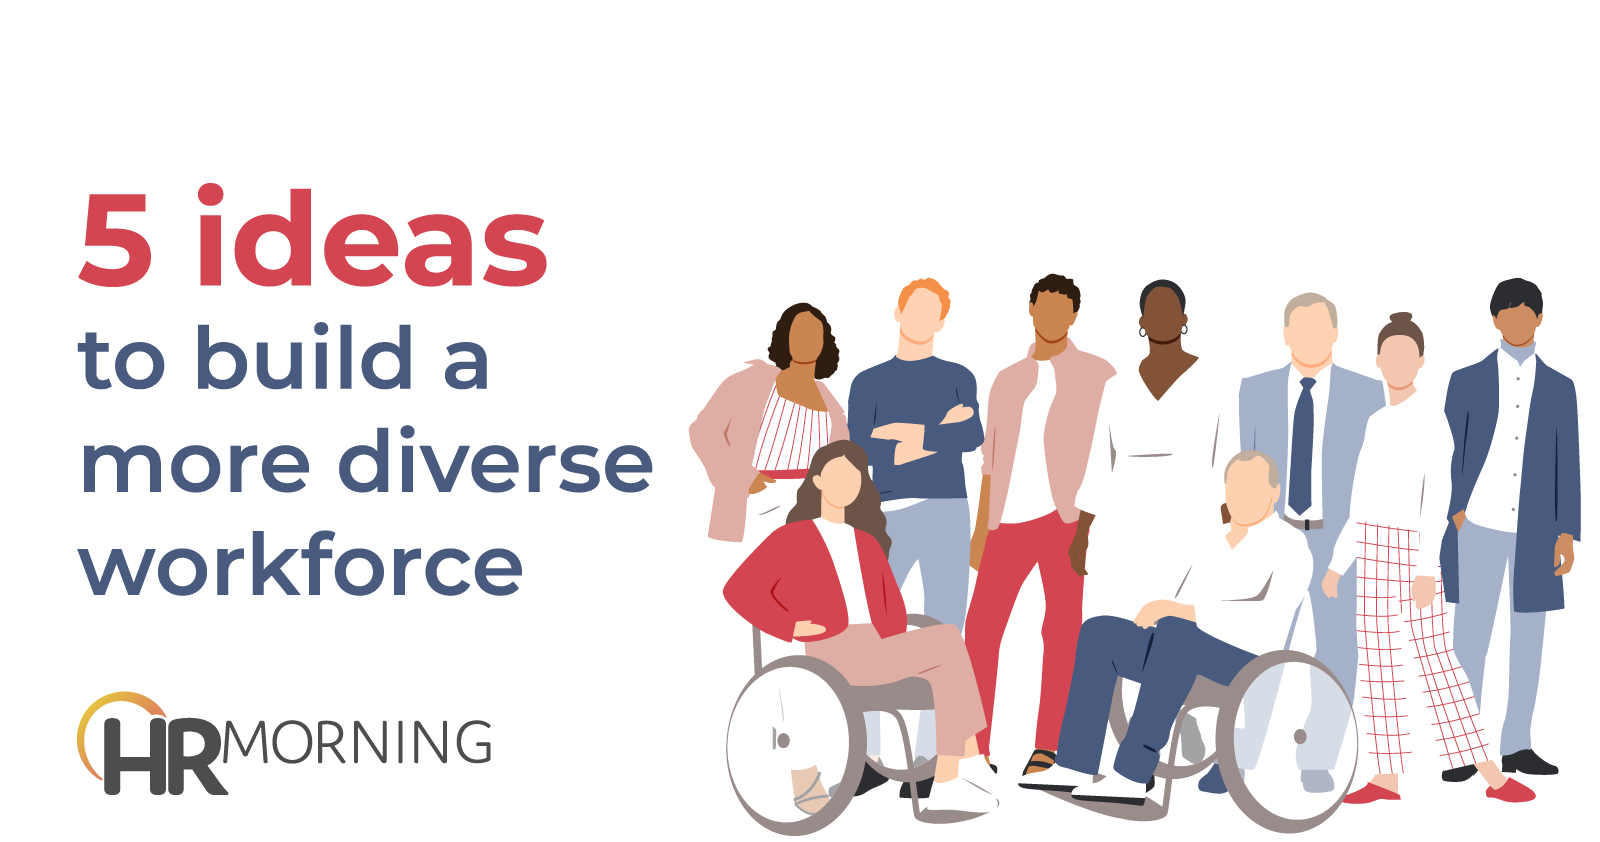 5 ideas to build a more diverse workforce